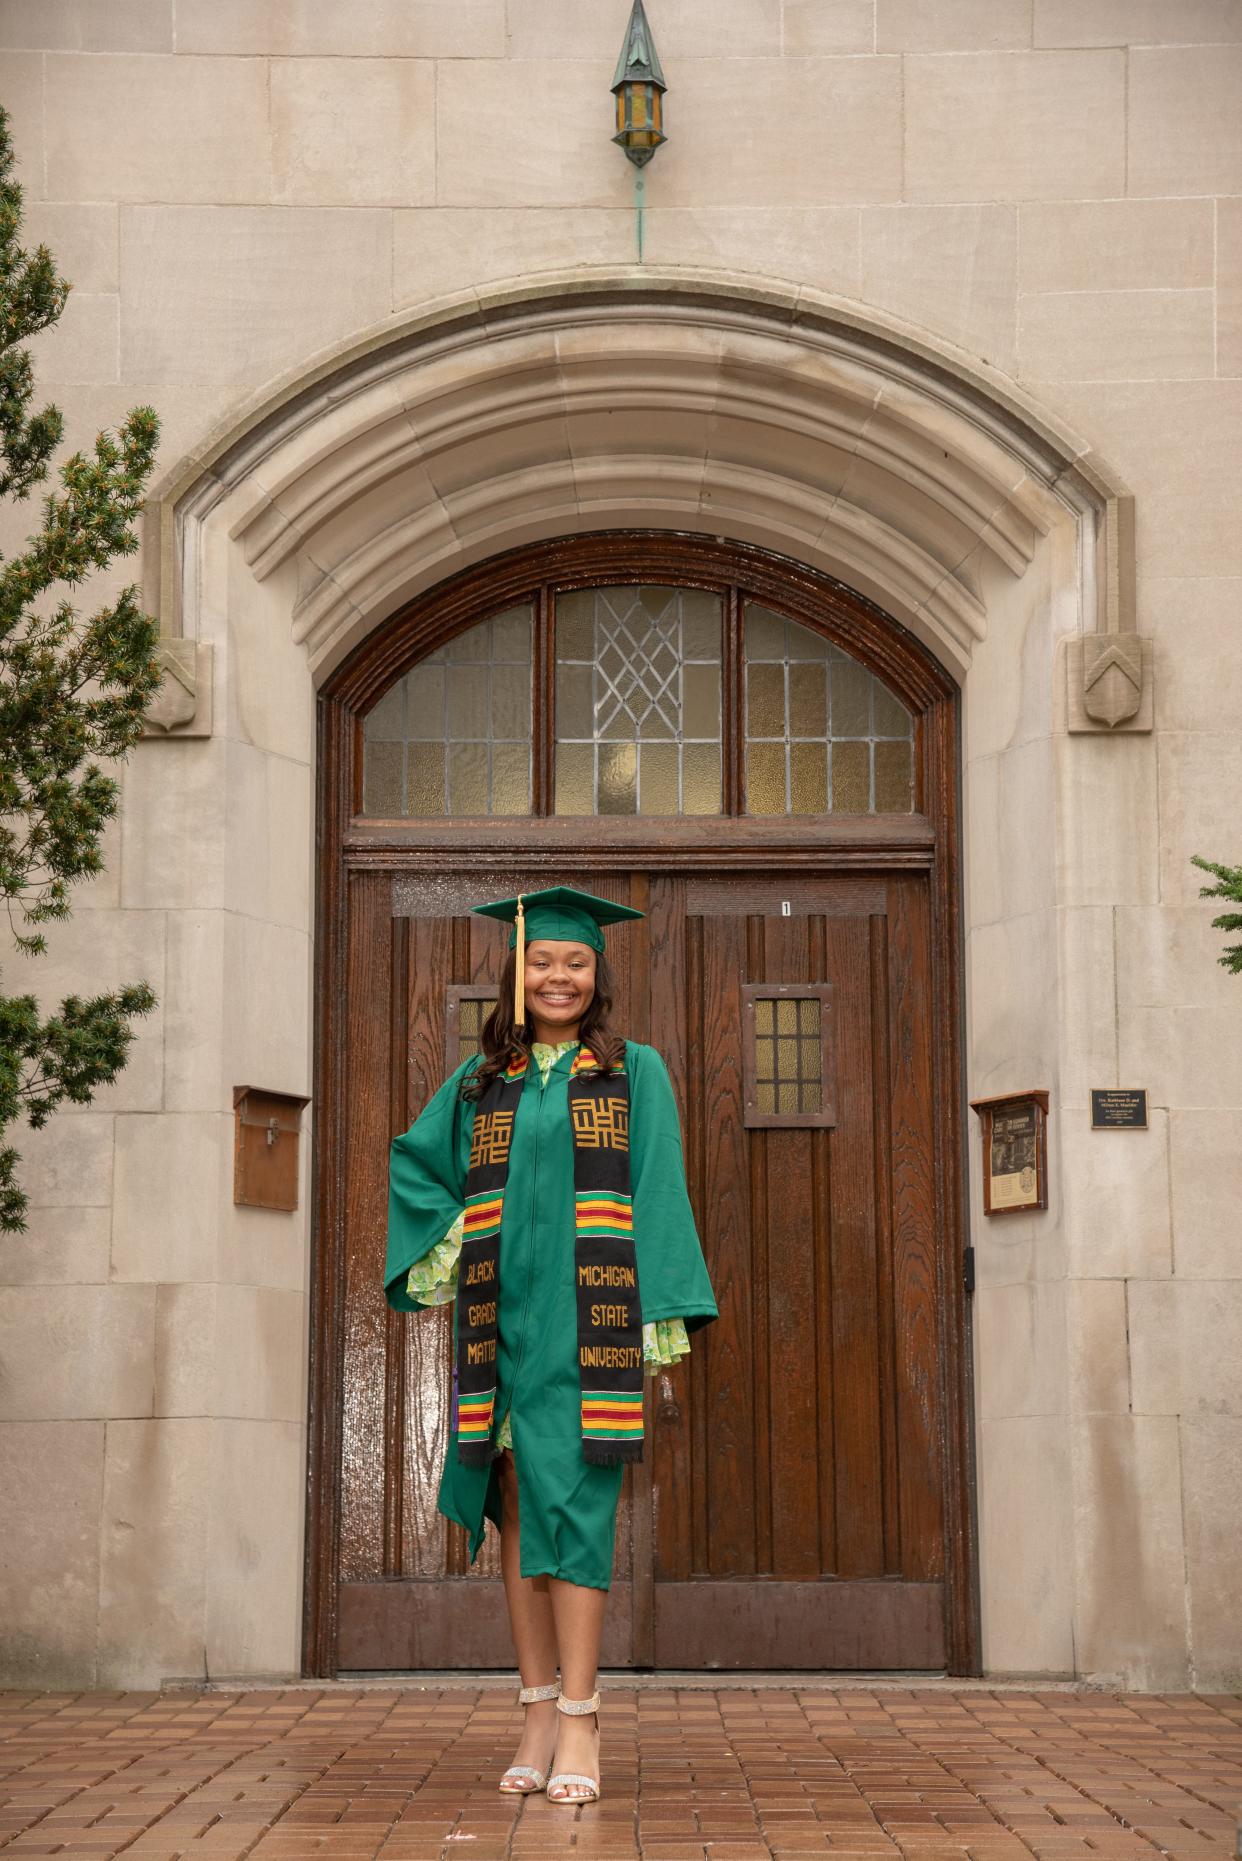 Madison Gladney, a May 2023 Michigan State University graduate, has a degree in public policy. She said she was surprised by how hard it was to find a well-paying job in the field she wanted after graduating.